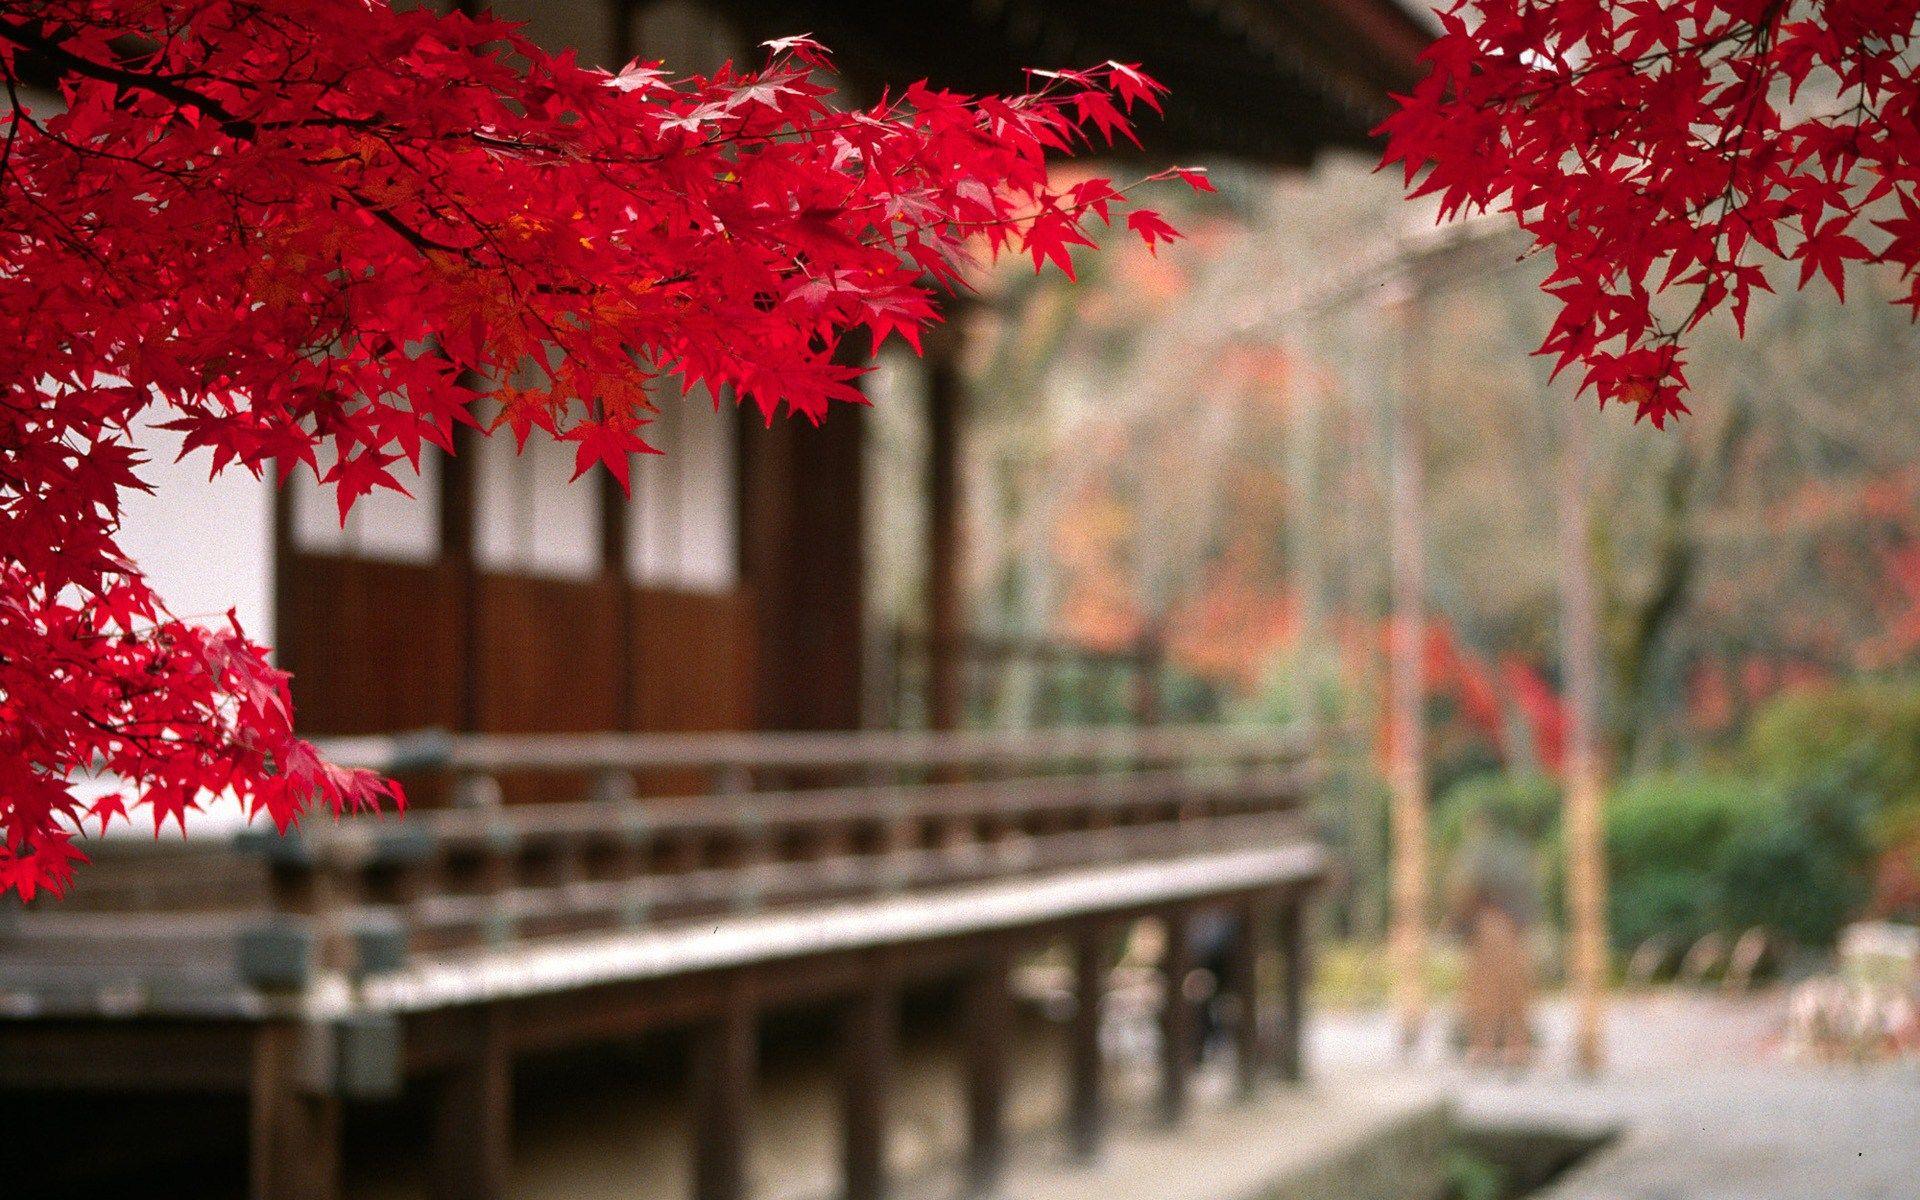 Autumn In Japan Widescreen Image. Beautiful image HD Picture